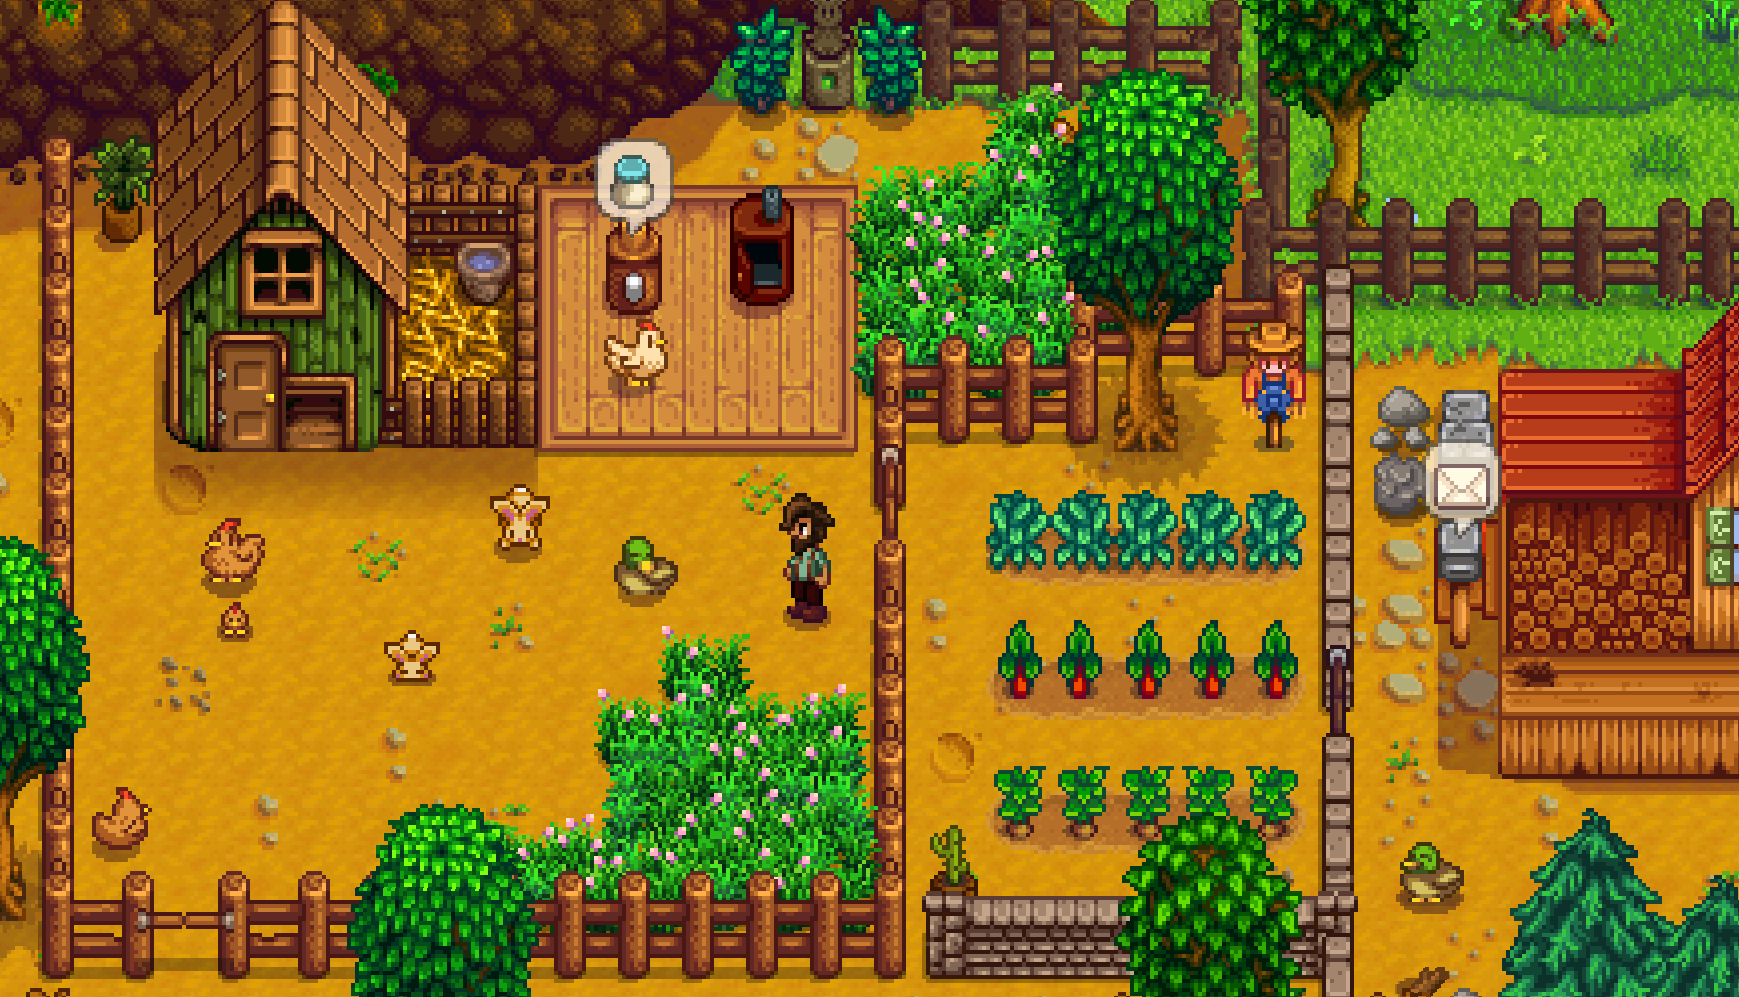 This is a small bit of the farm you can create in Stardew Valley